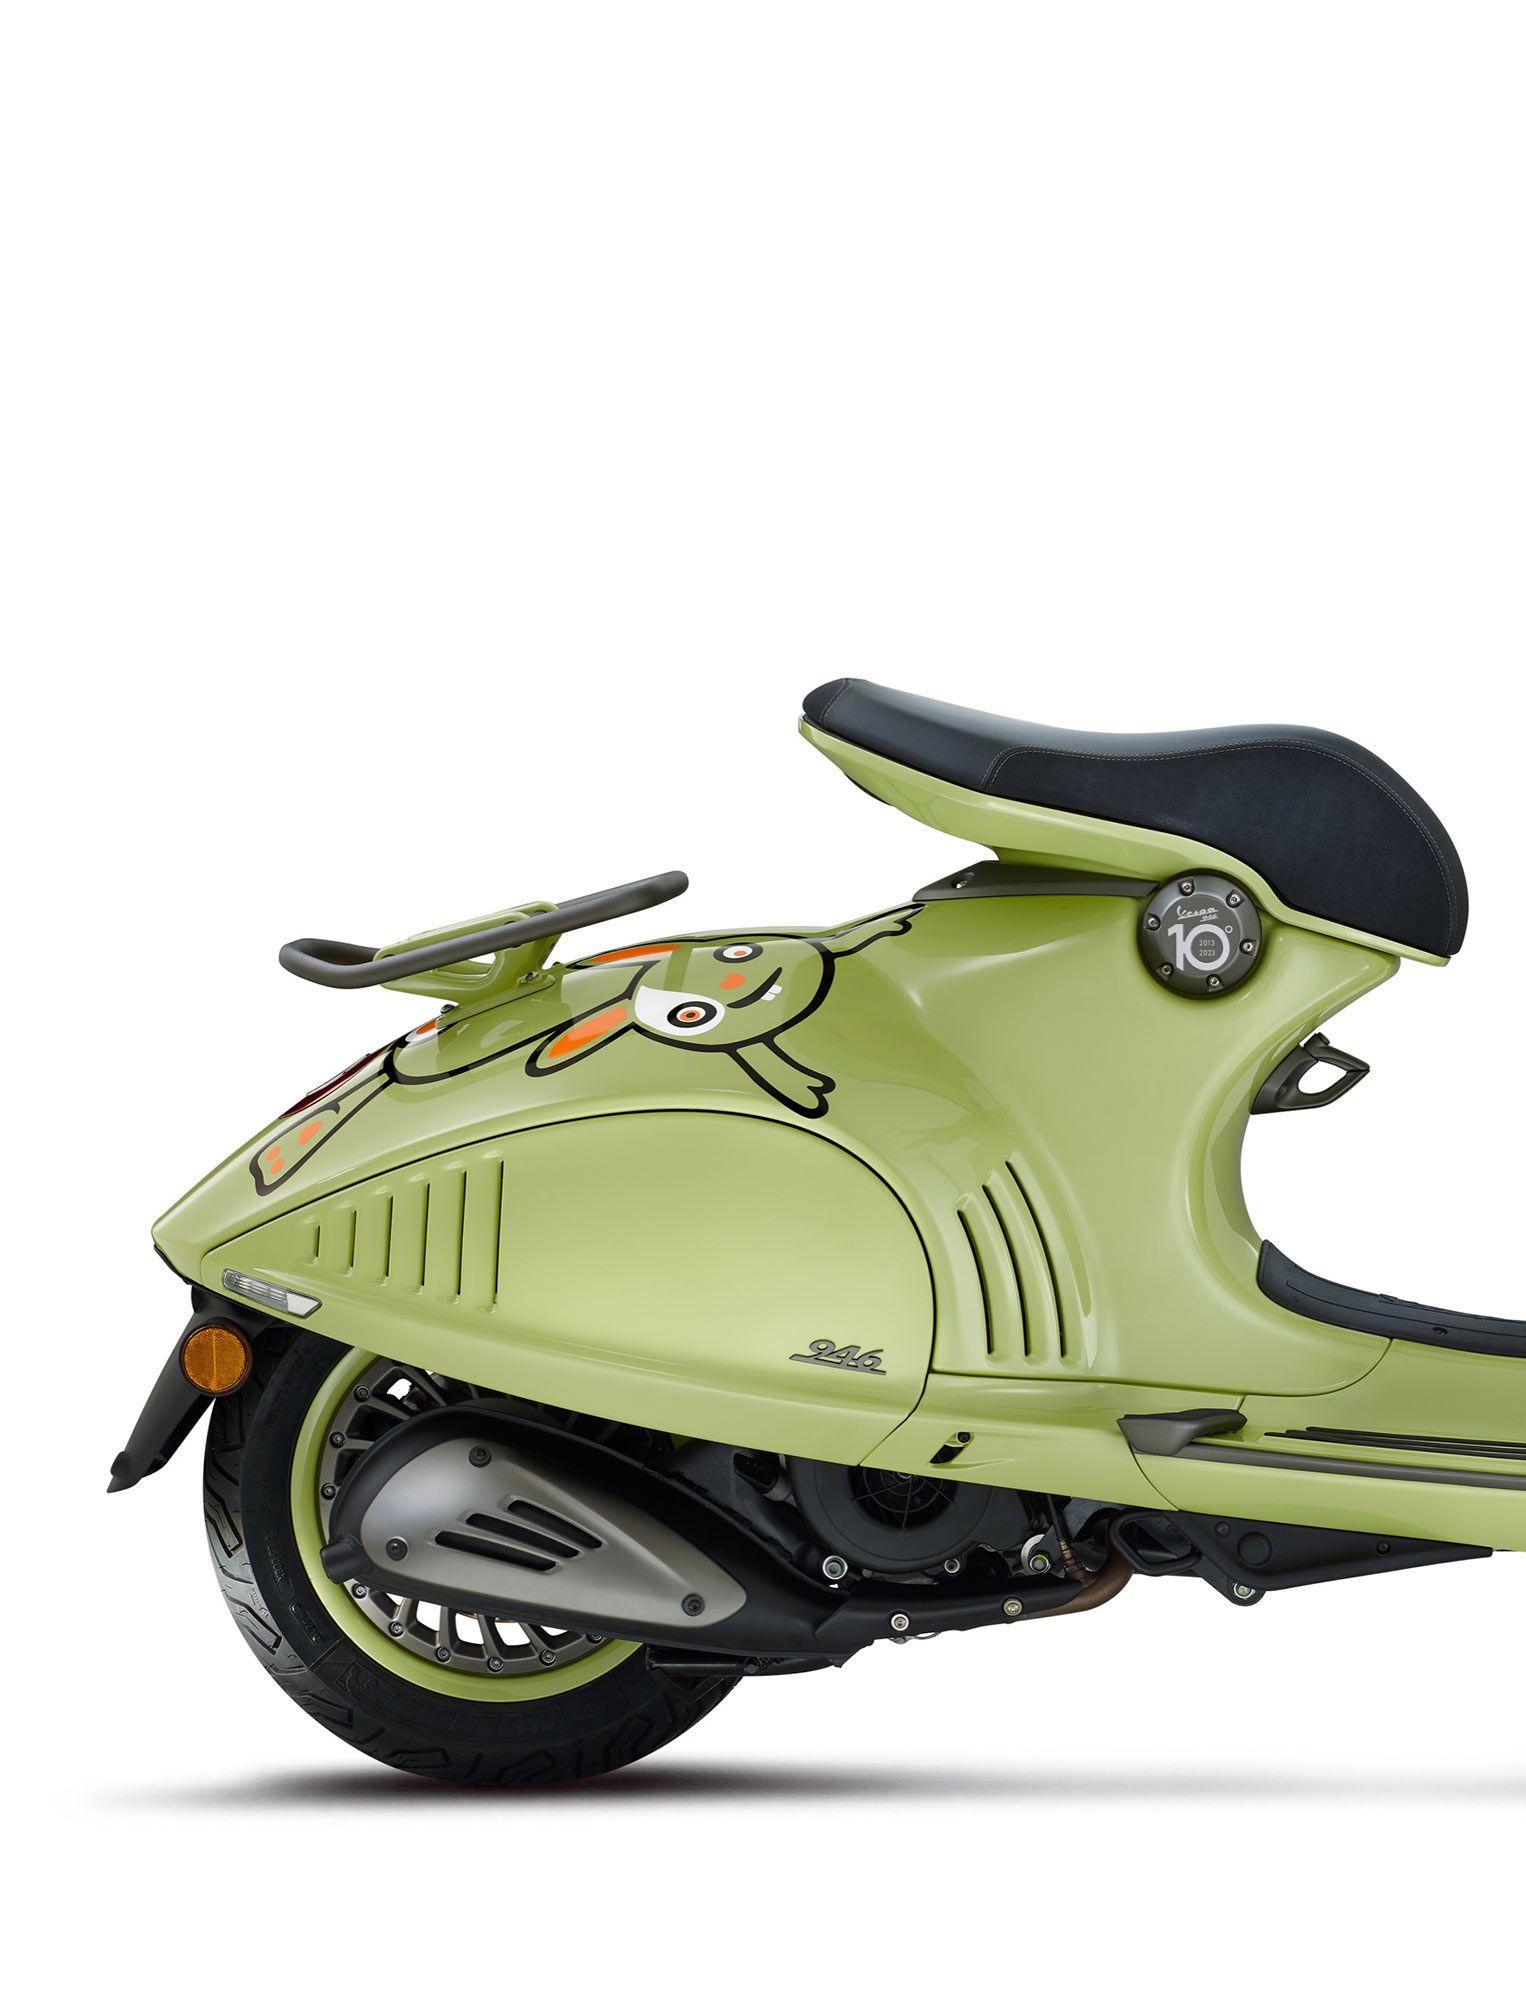 The Vespa 946 Bunny Edition will feature playful graphics to celebrate the year of the rabbit.